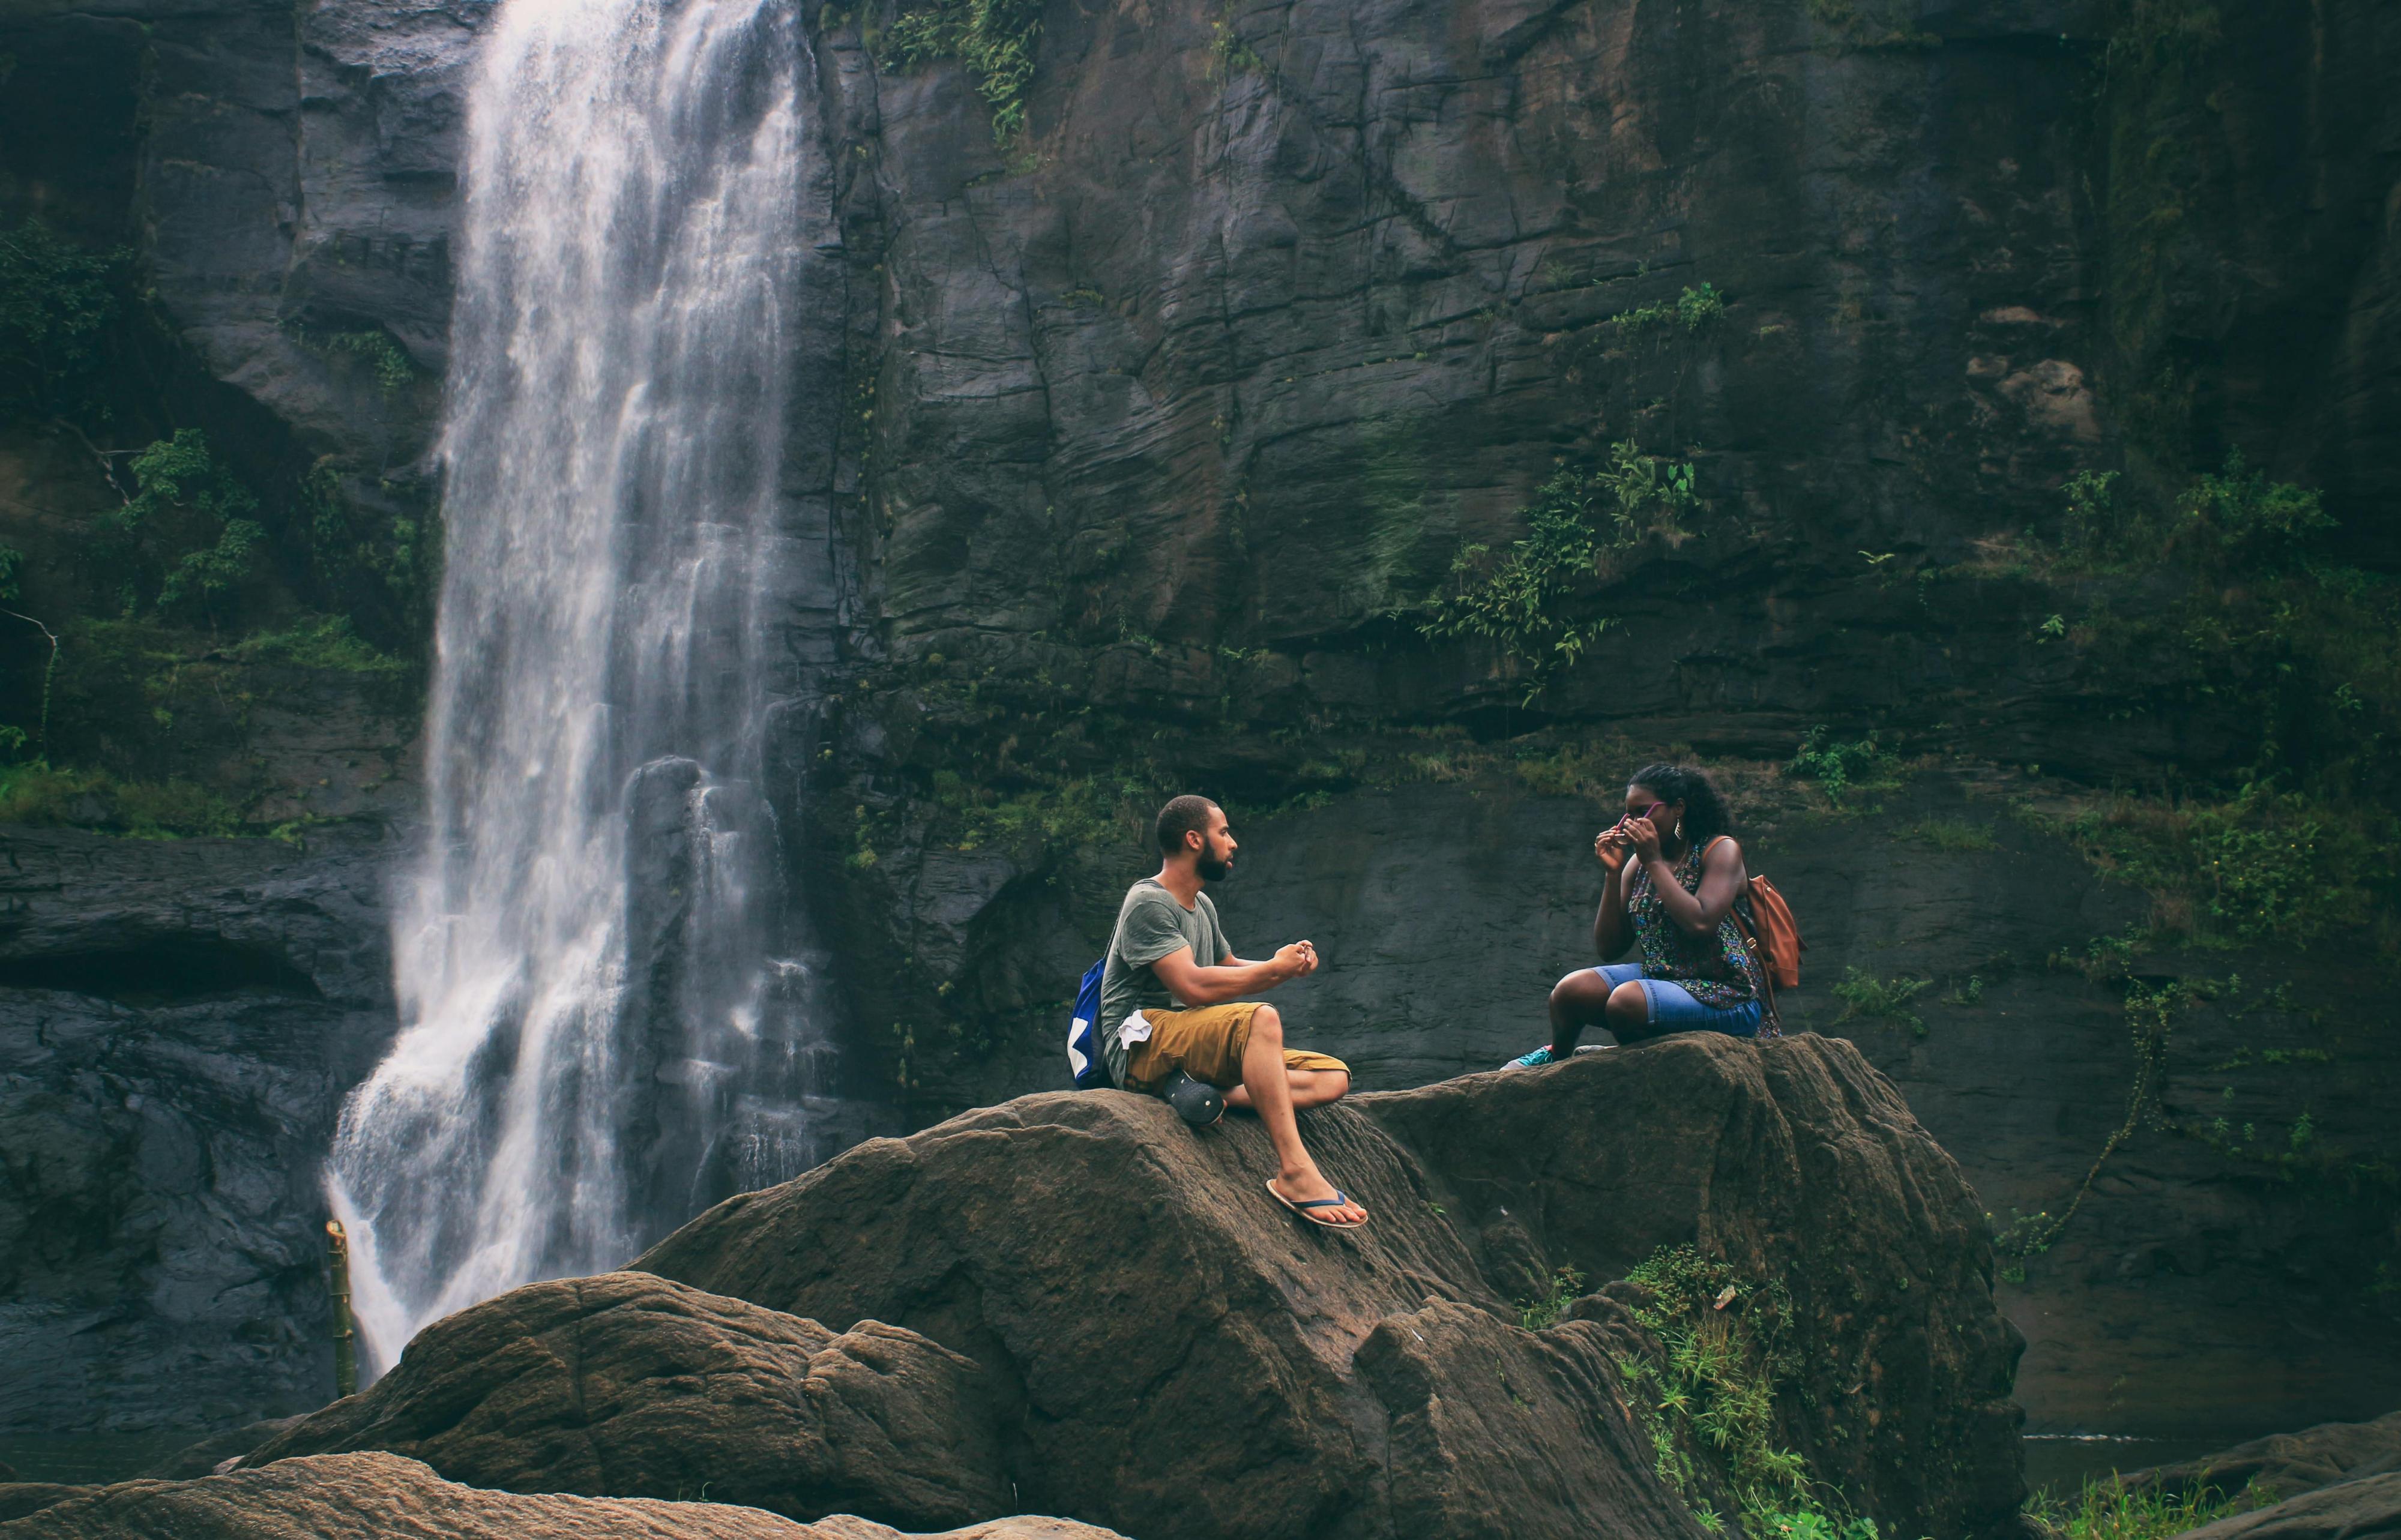 Man and Woman by Waterfall